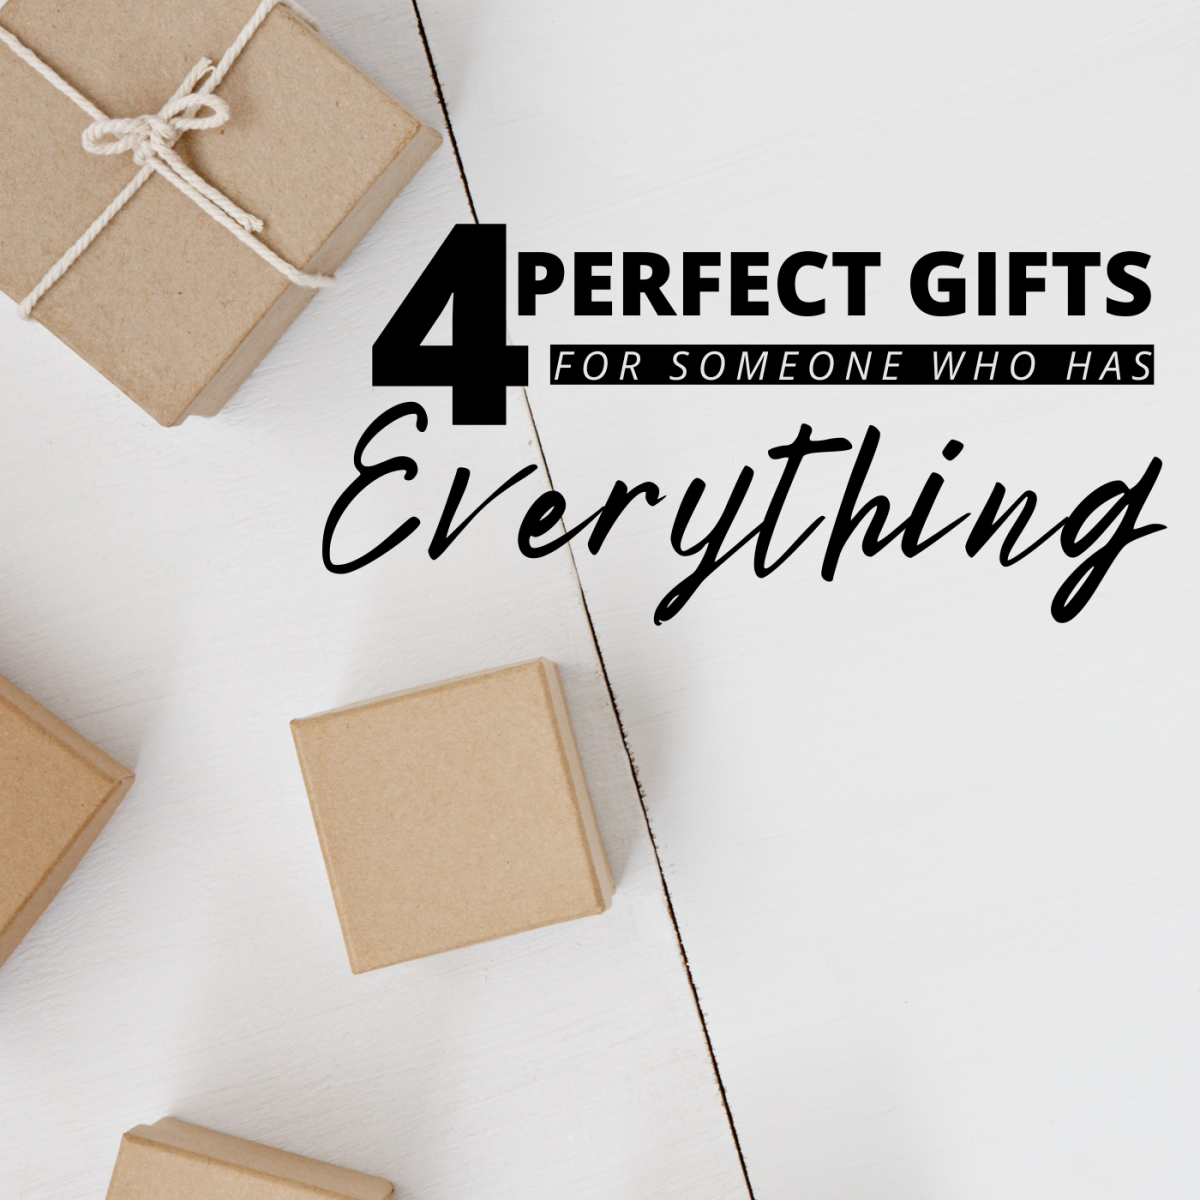 If you need a gift for someone who is tough to shop for, consider gifting one of these useful items. 